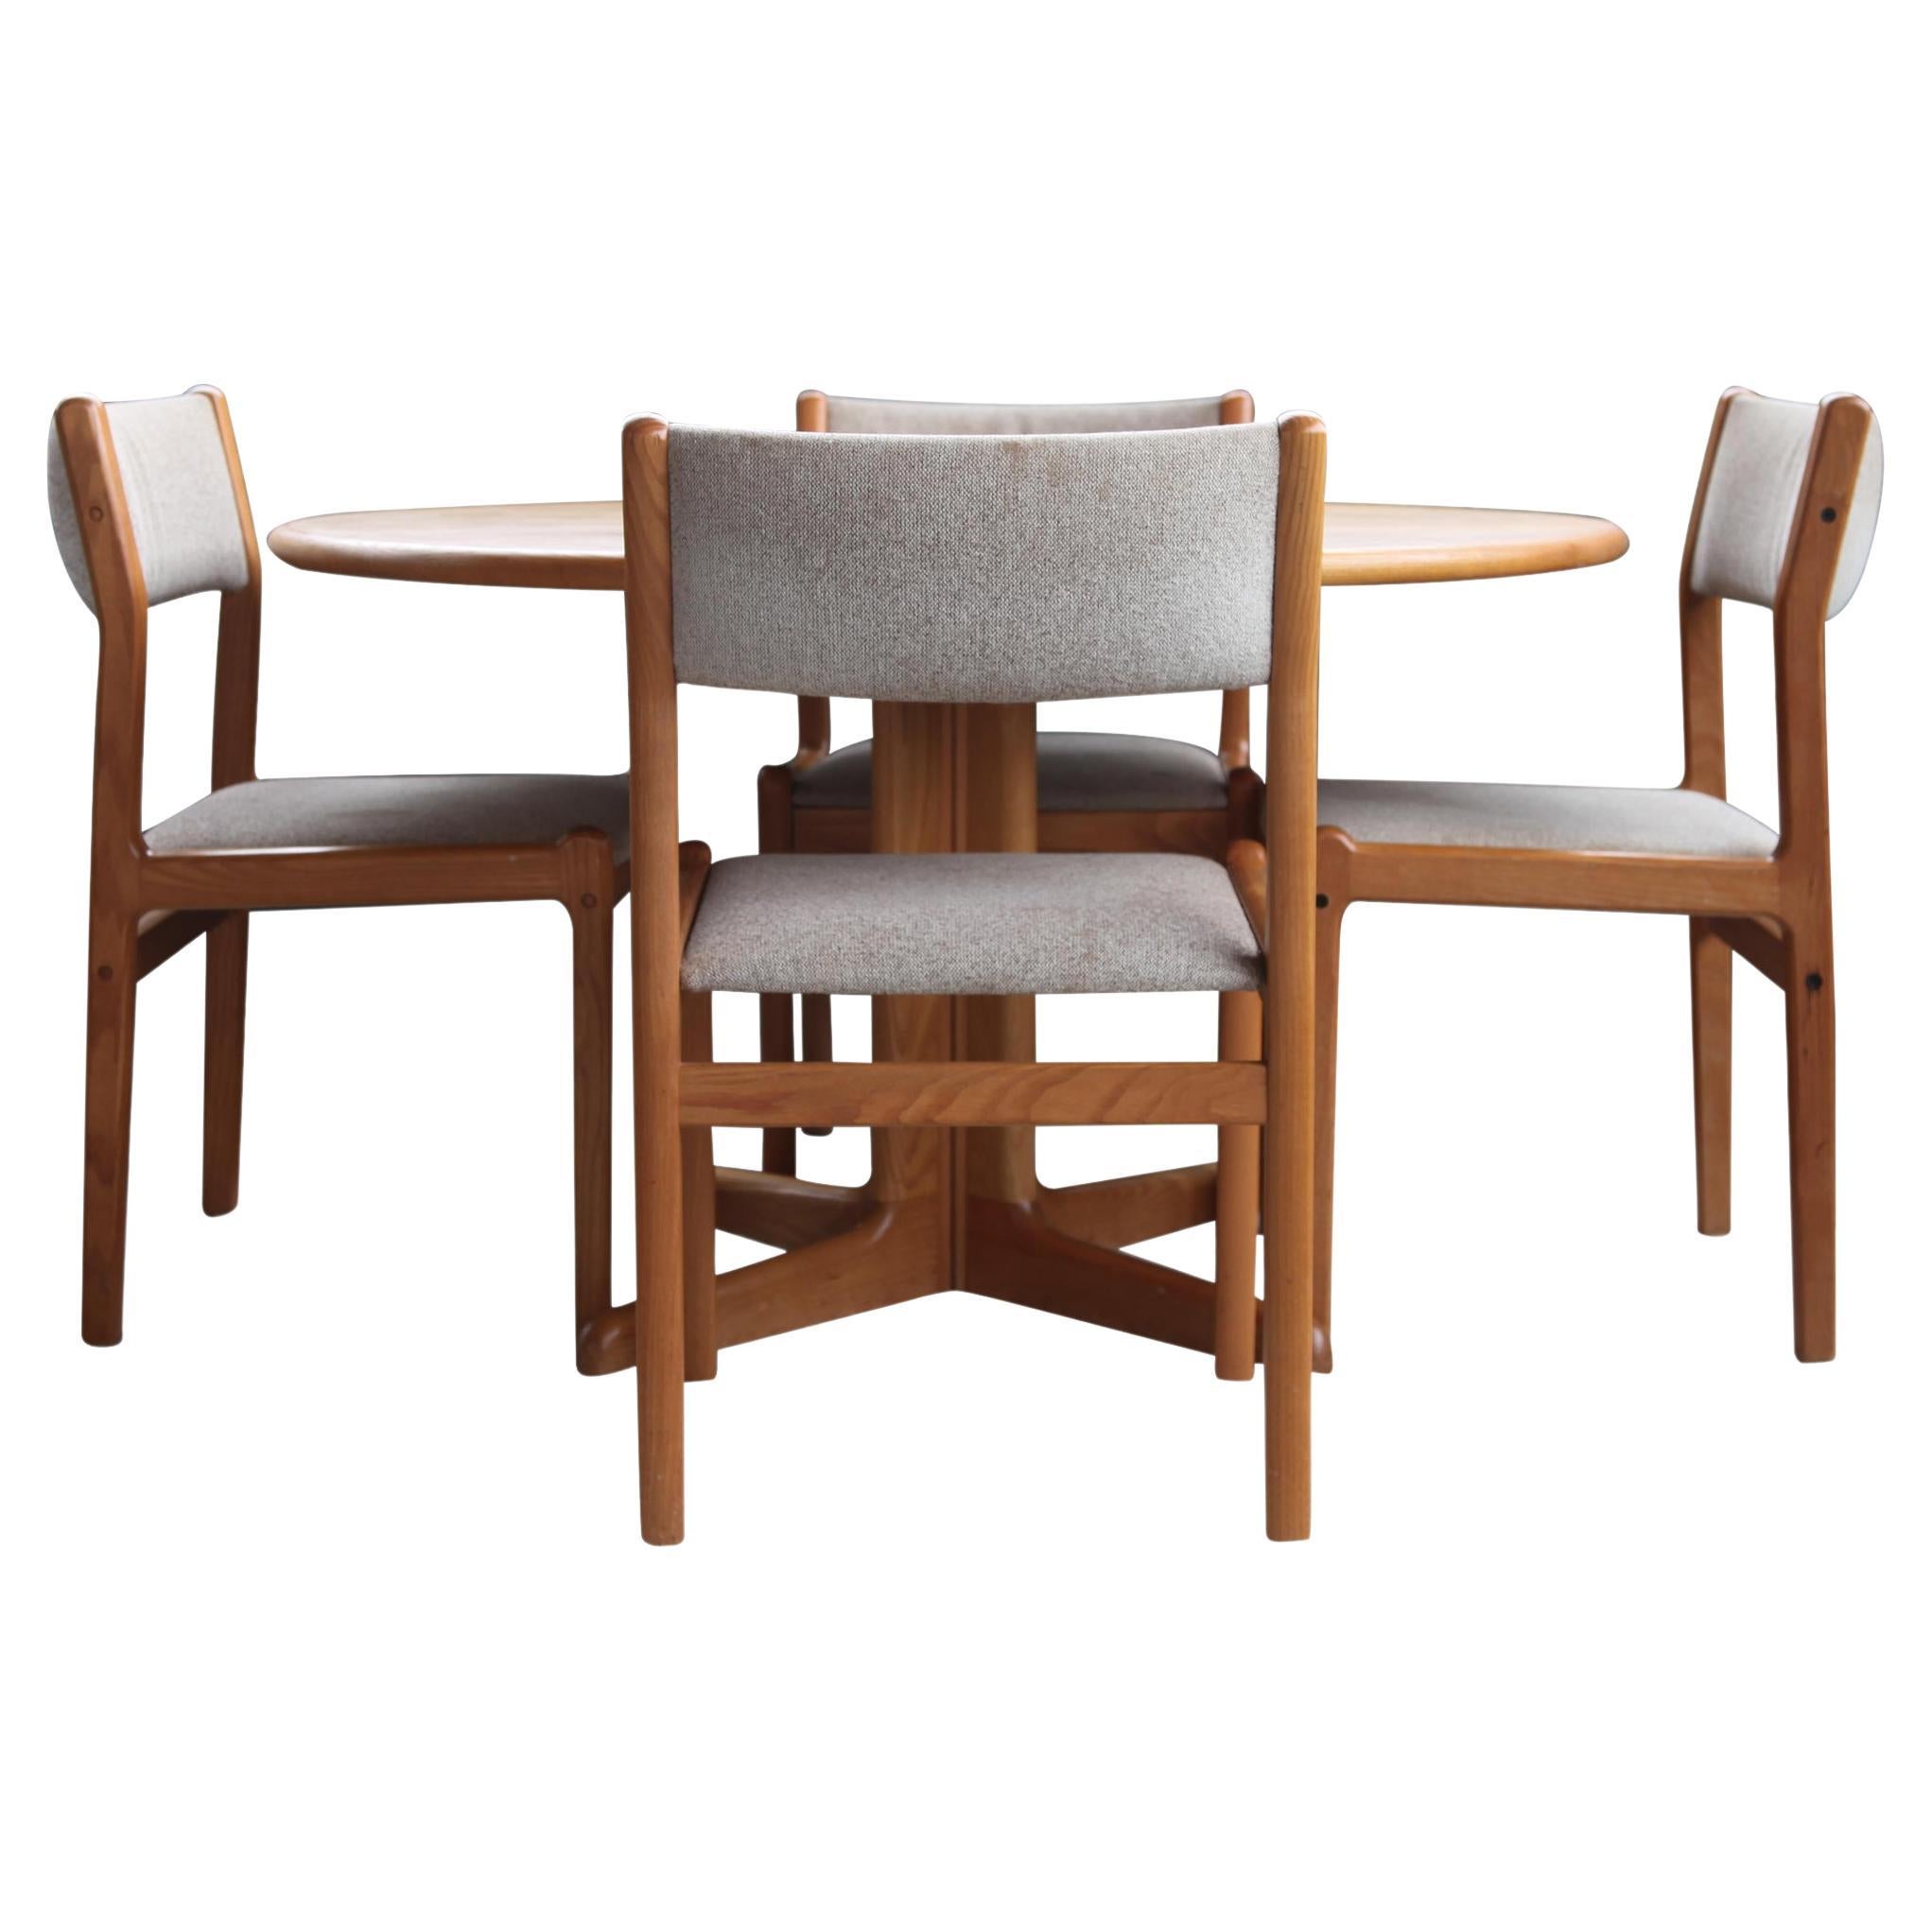 MCM Round to Oval Dining Table w/ Leaves + 4 Chairs by Gudme Jl Moller, 9 Pcs